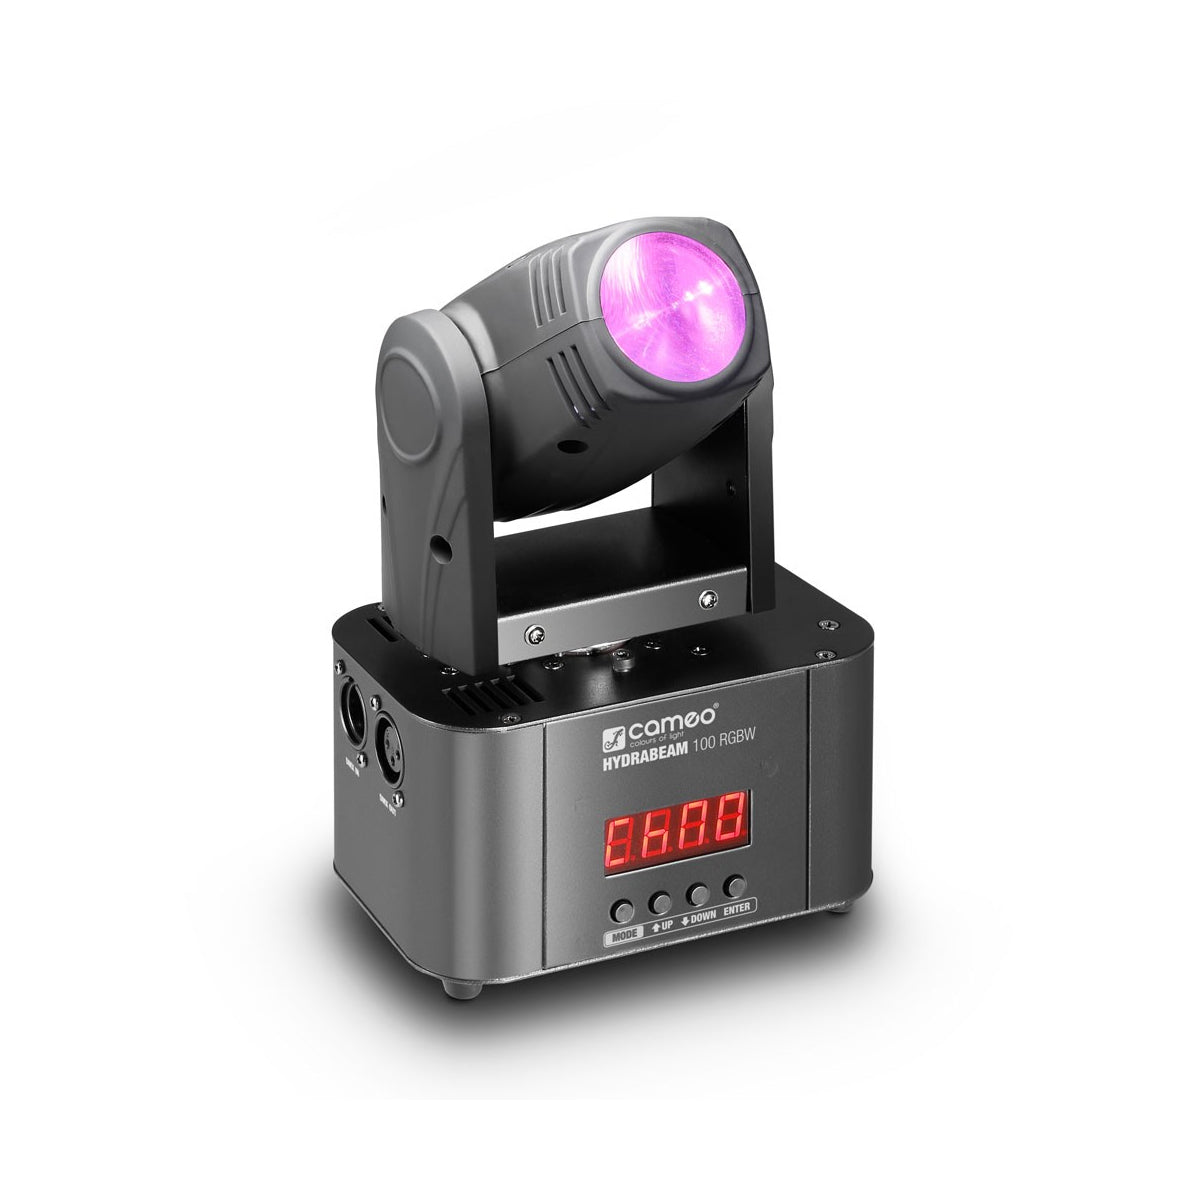 Cameo HB100 RGBW - Lighting system with 1 ultra-fast 10 W CREE RGBW Quad LED Moving Heads